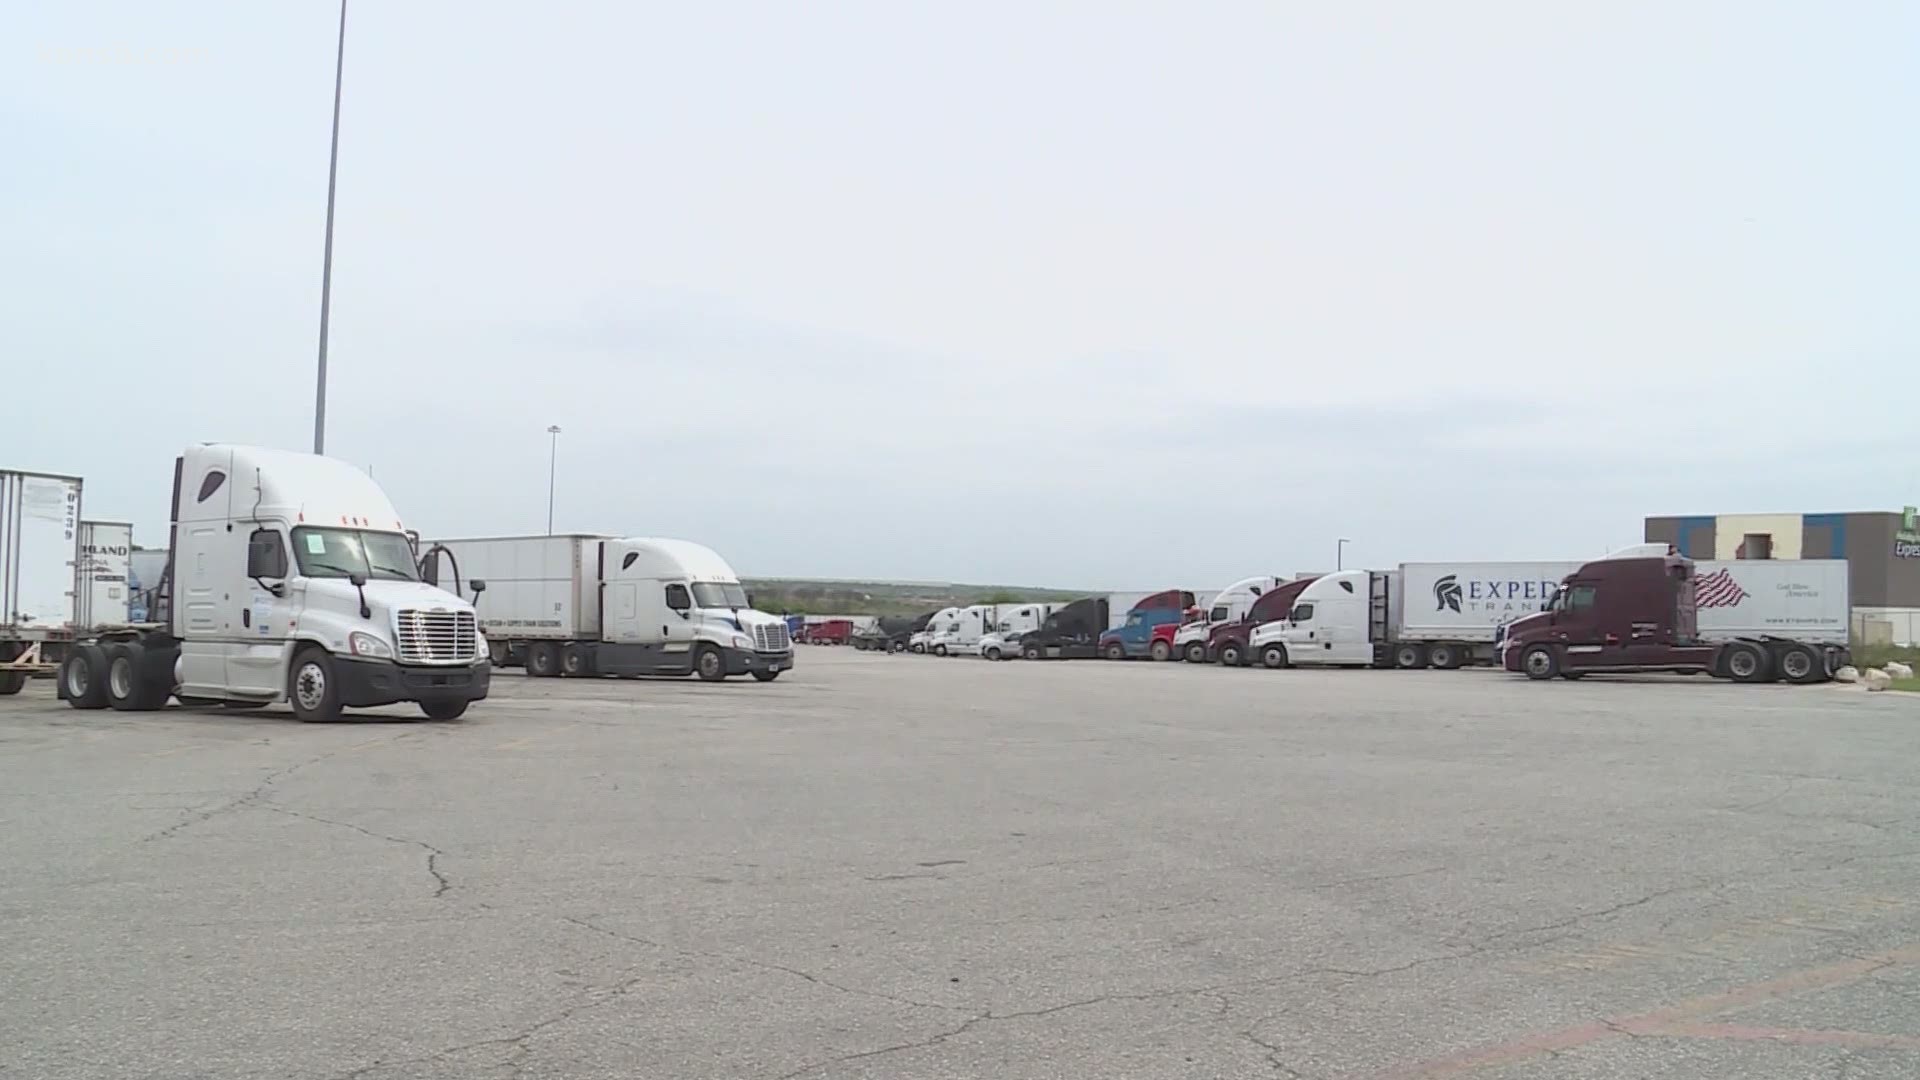 The call came in to San Antonio, and 911 dispatchers here helped find the trailer in Laredo.